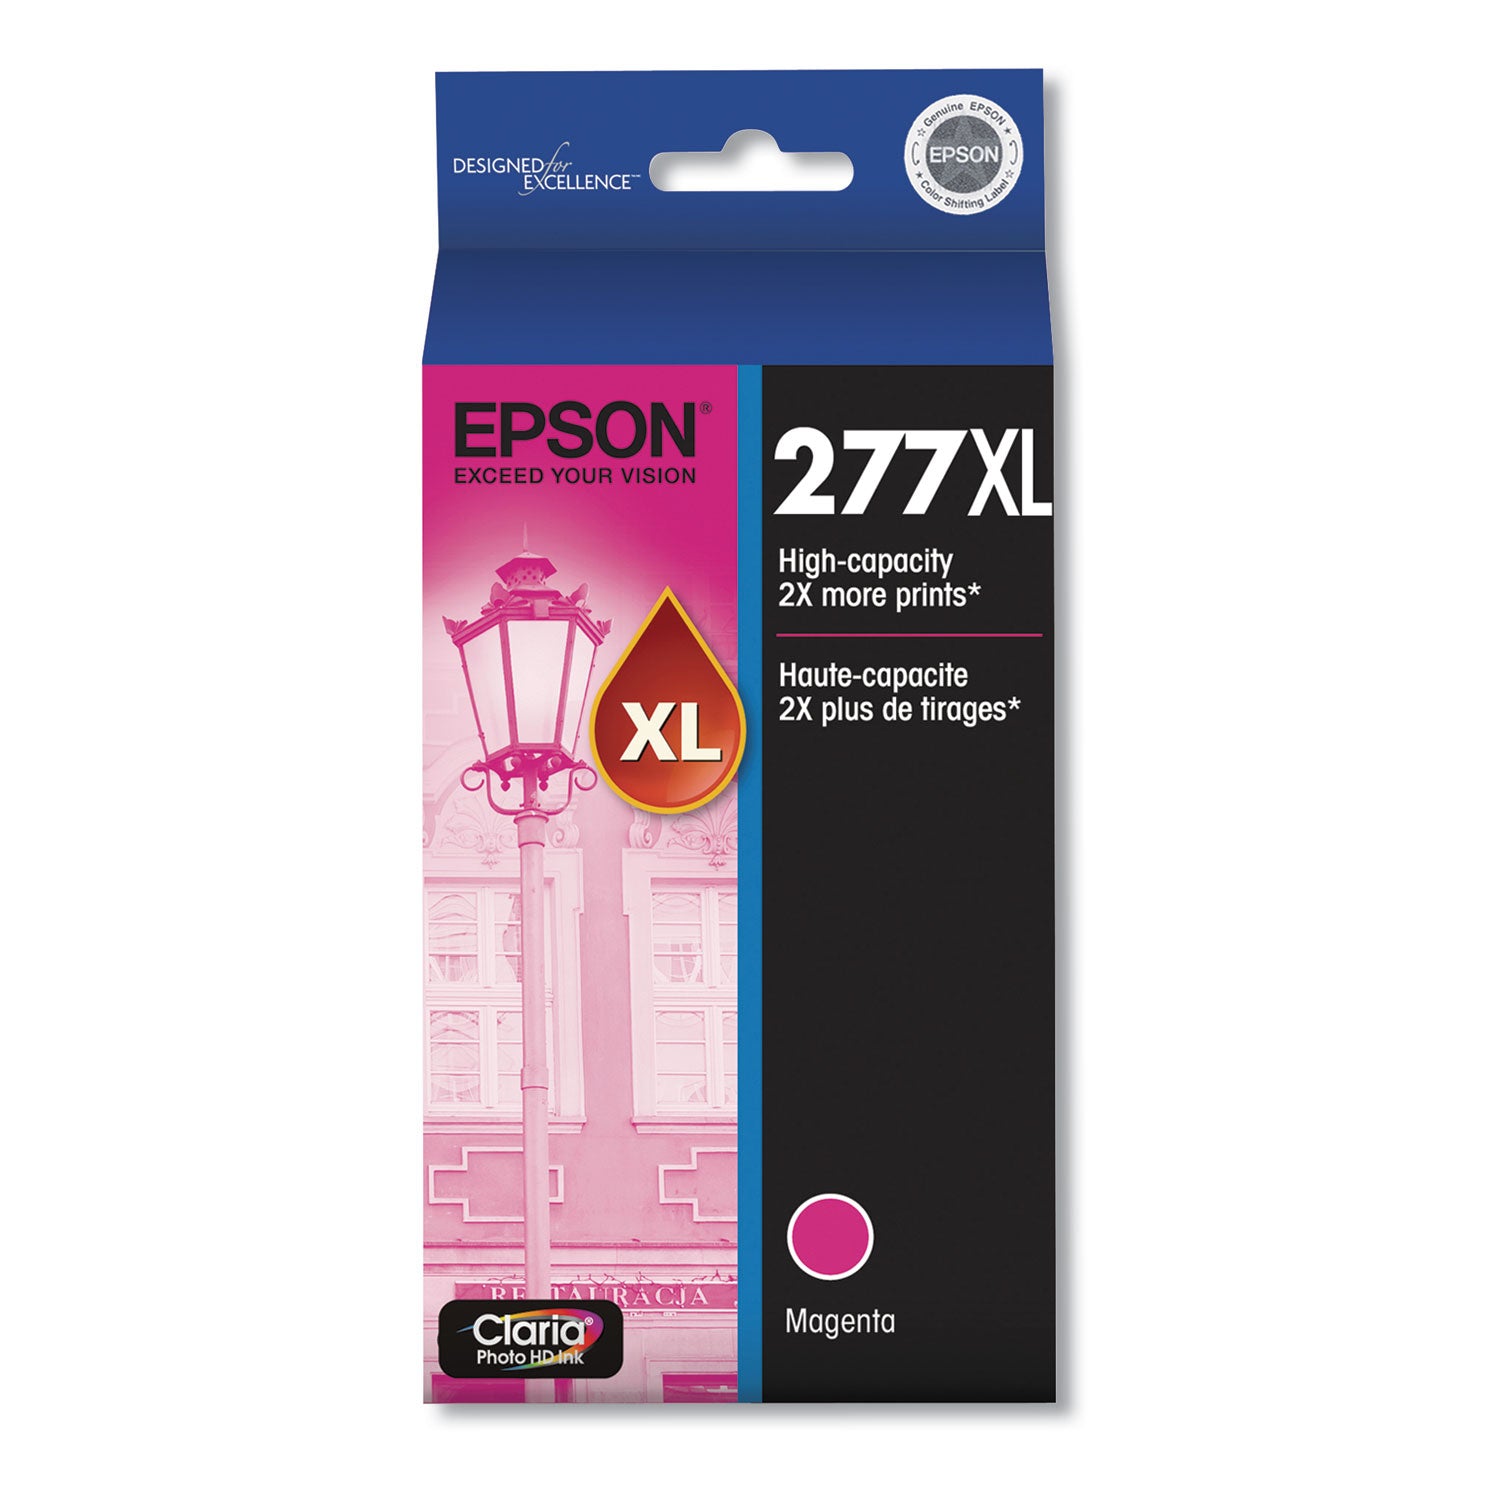 t277xl320-s-277xl-claria-high-yield-ink-740-page-yield-magenta_epst277xl320s - 1